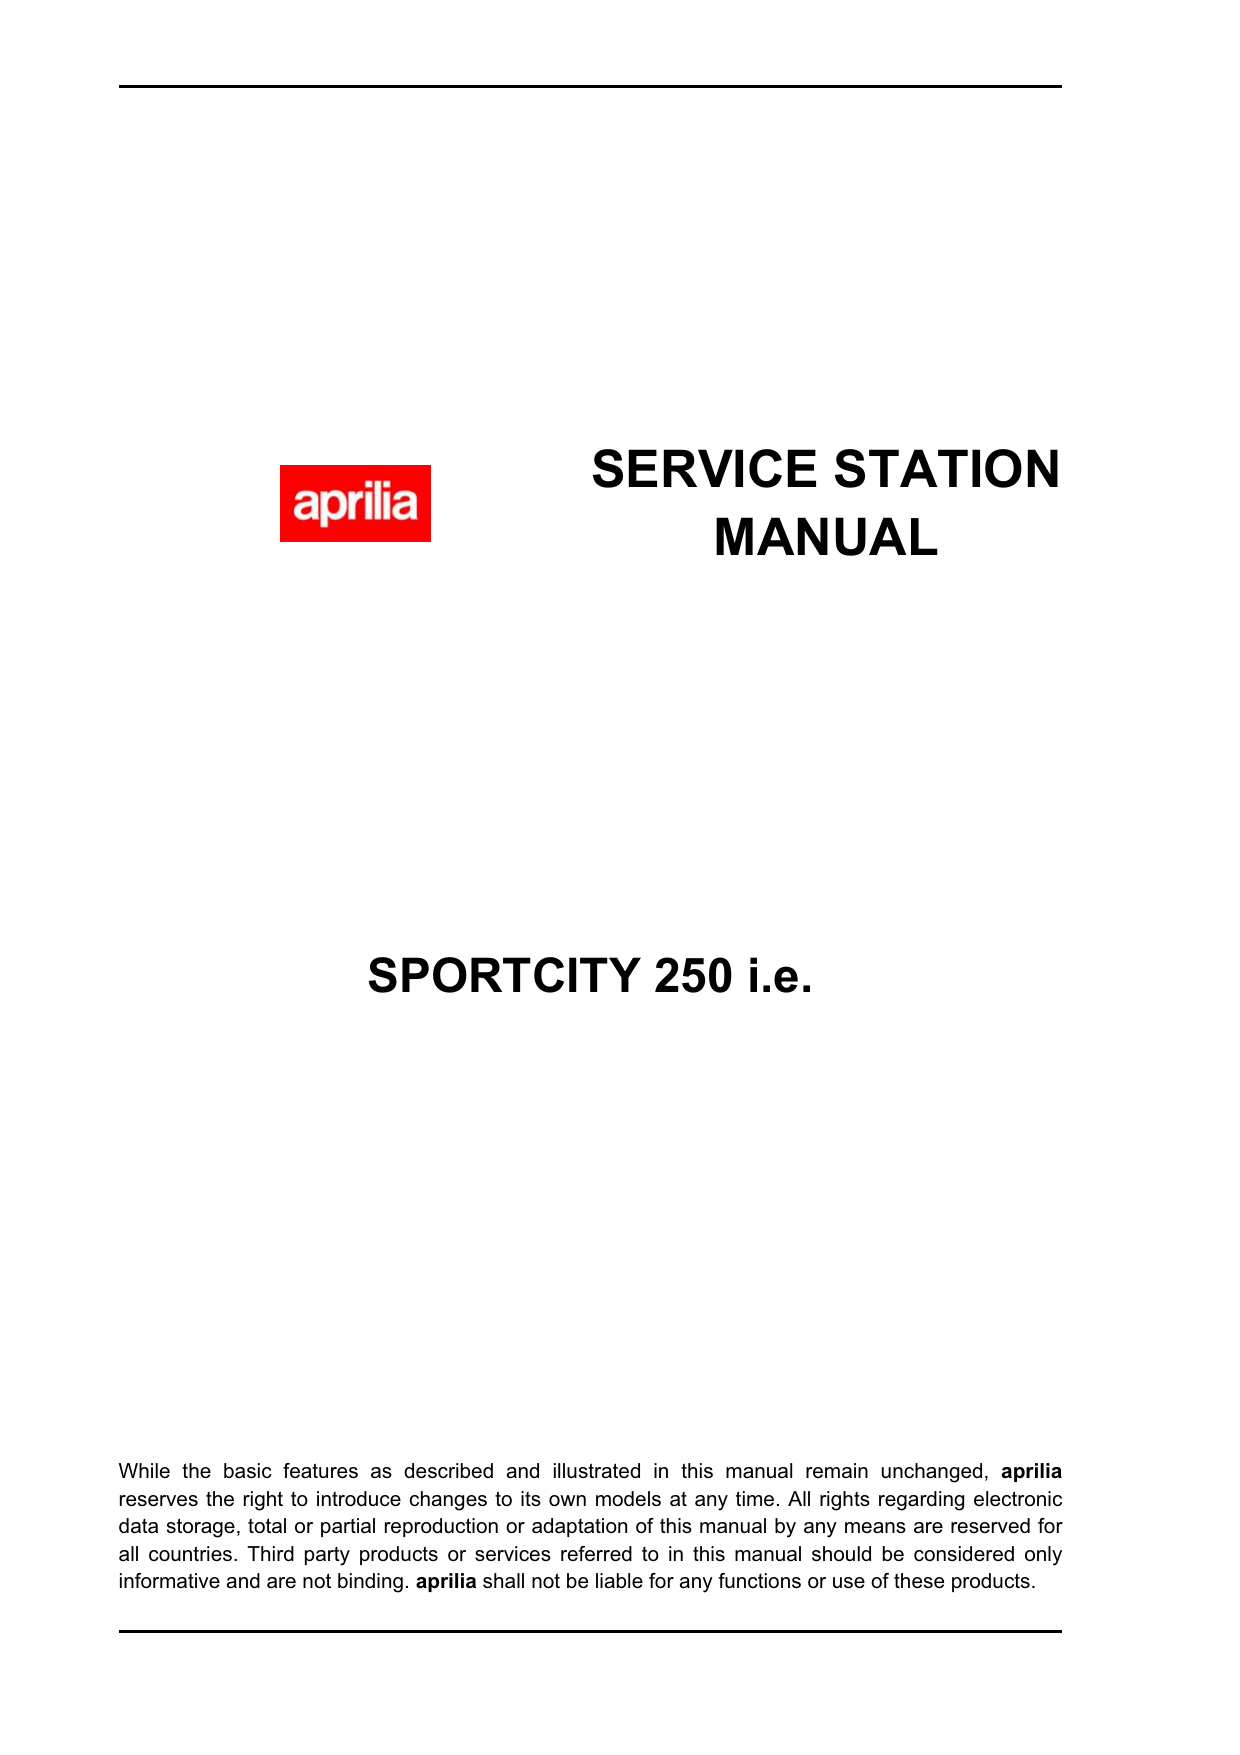 Aprilia Sportcity 250 ie, scooter service station manual Preview image 2